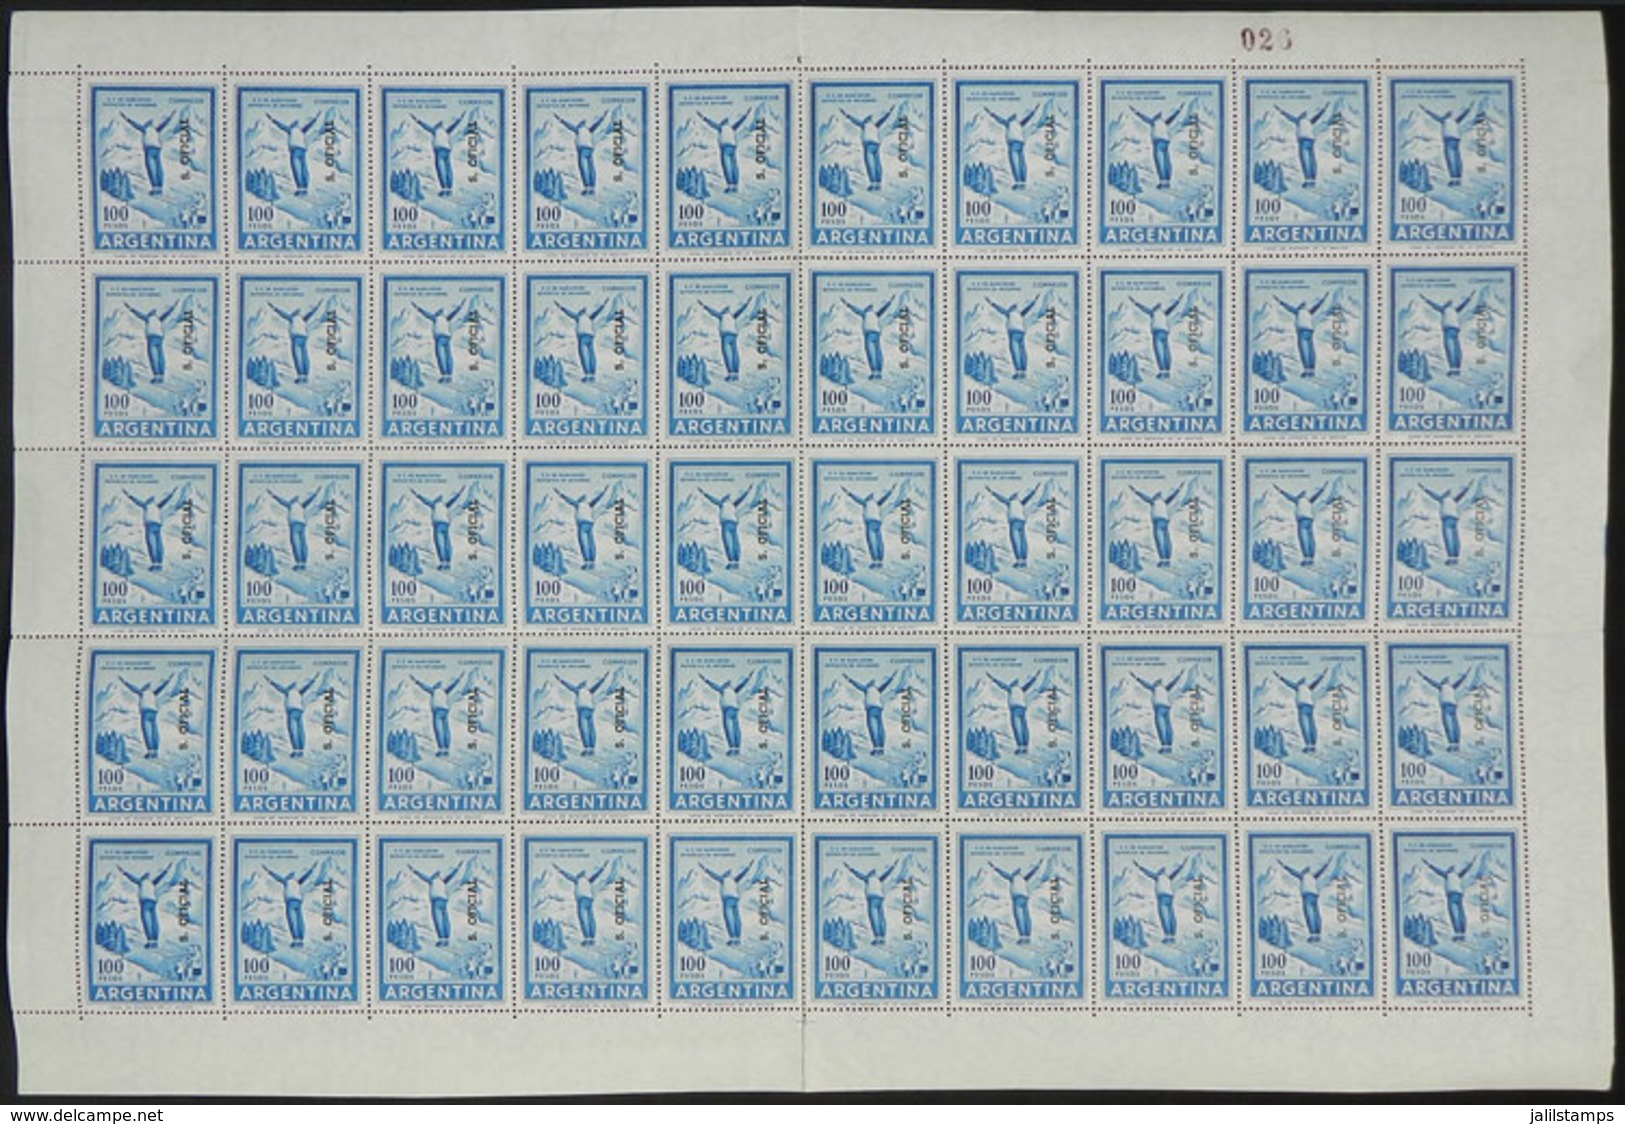 296 ARGENTINA: GJ.774, 100P. Ski, On Imported Unsurfaced Paper, Complete Sheet Of 50 Stamps, MNH, Excellent And Very Rar - Officials